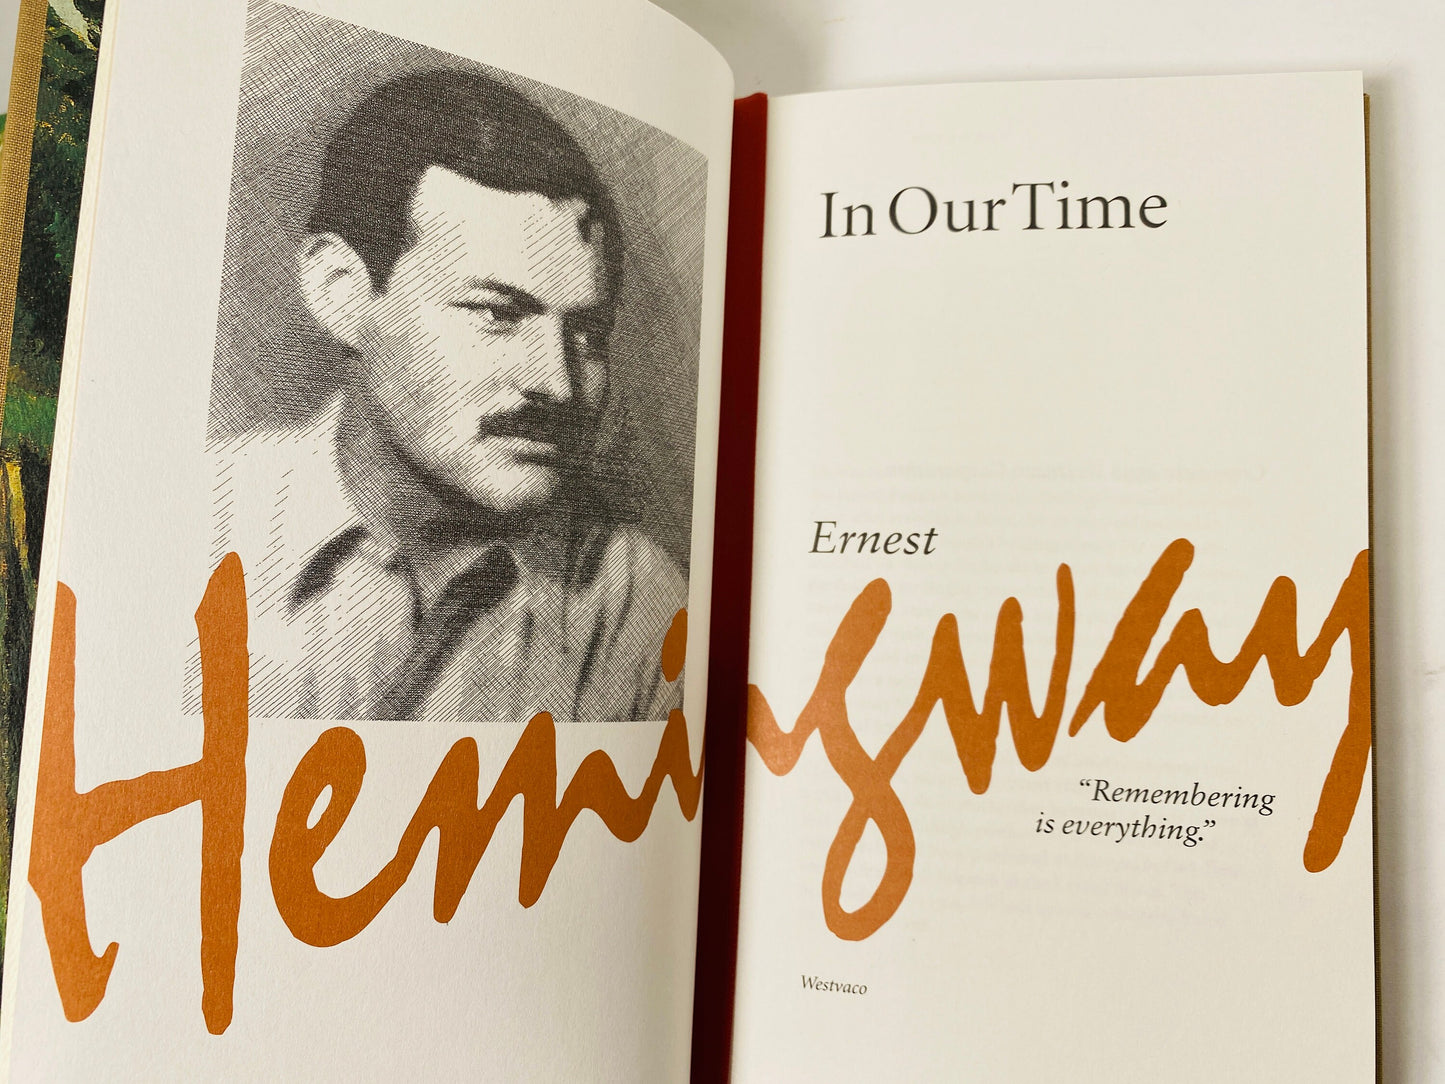 In Our Time by Ernest Hemingway Vintage book with sleeve Hemingway's first collection of short stories. GORGEOUS illustrations!